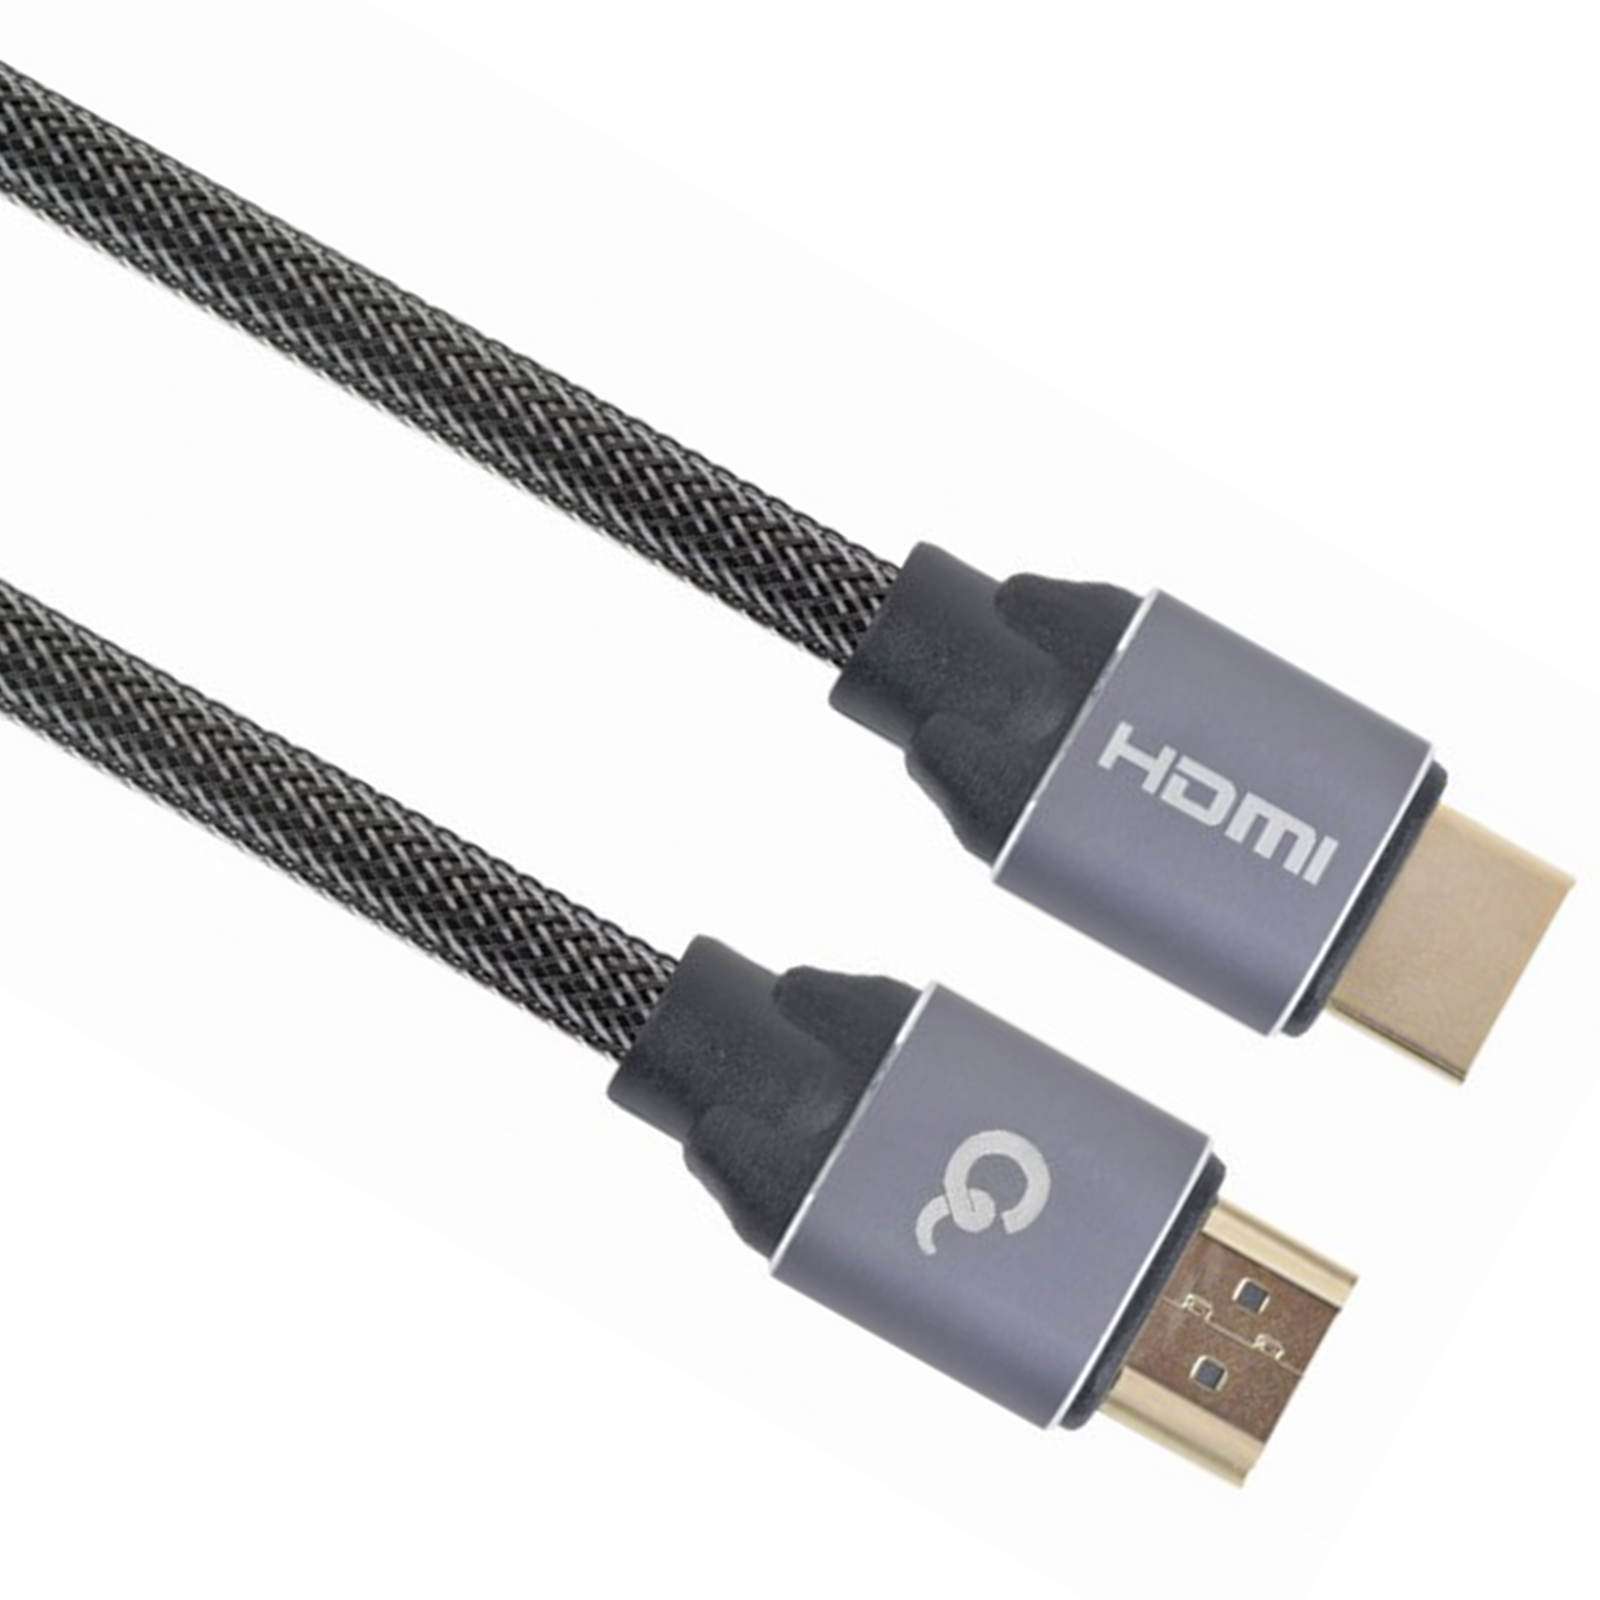 High speed HDMI cable with Ethernet, Premium series, 5 m (CCBP-HDMI-5M)